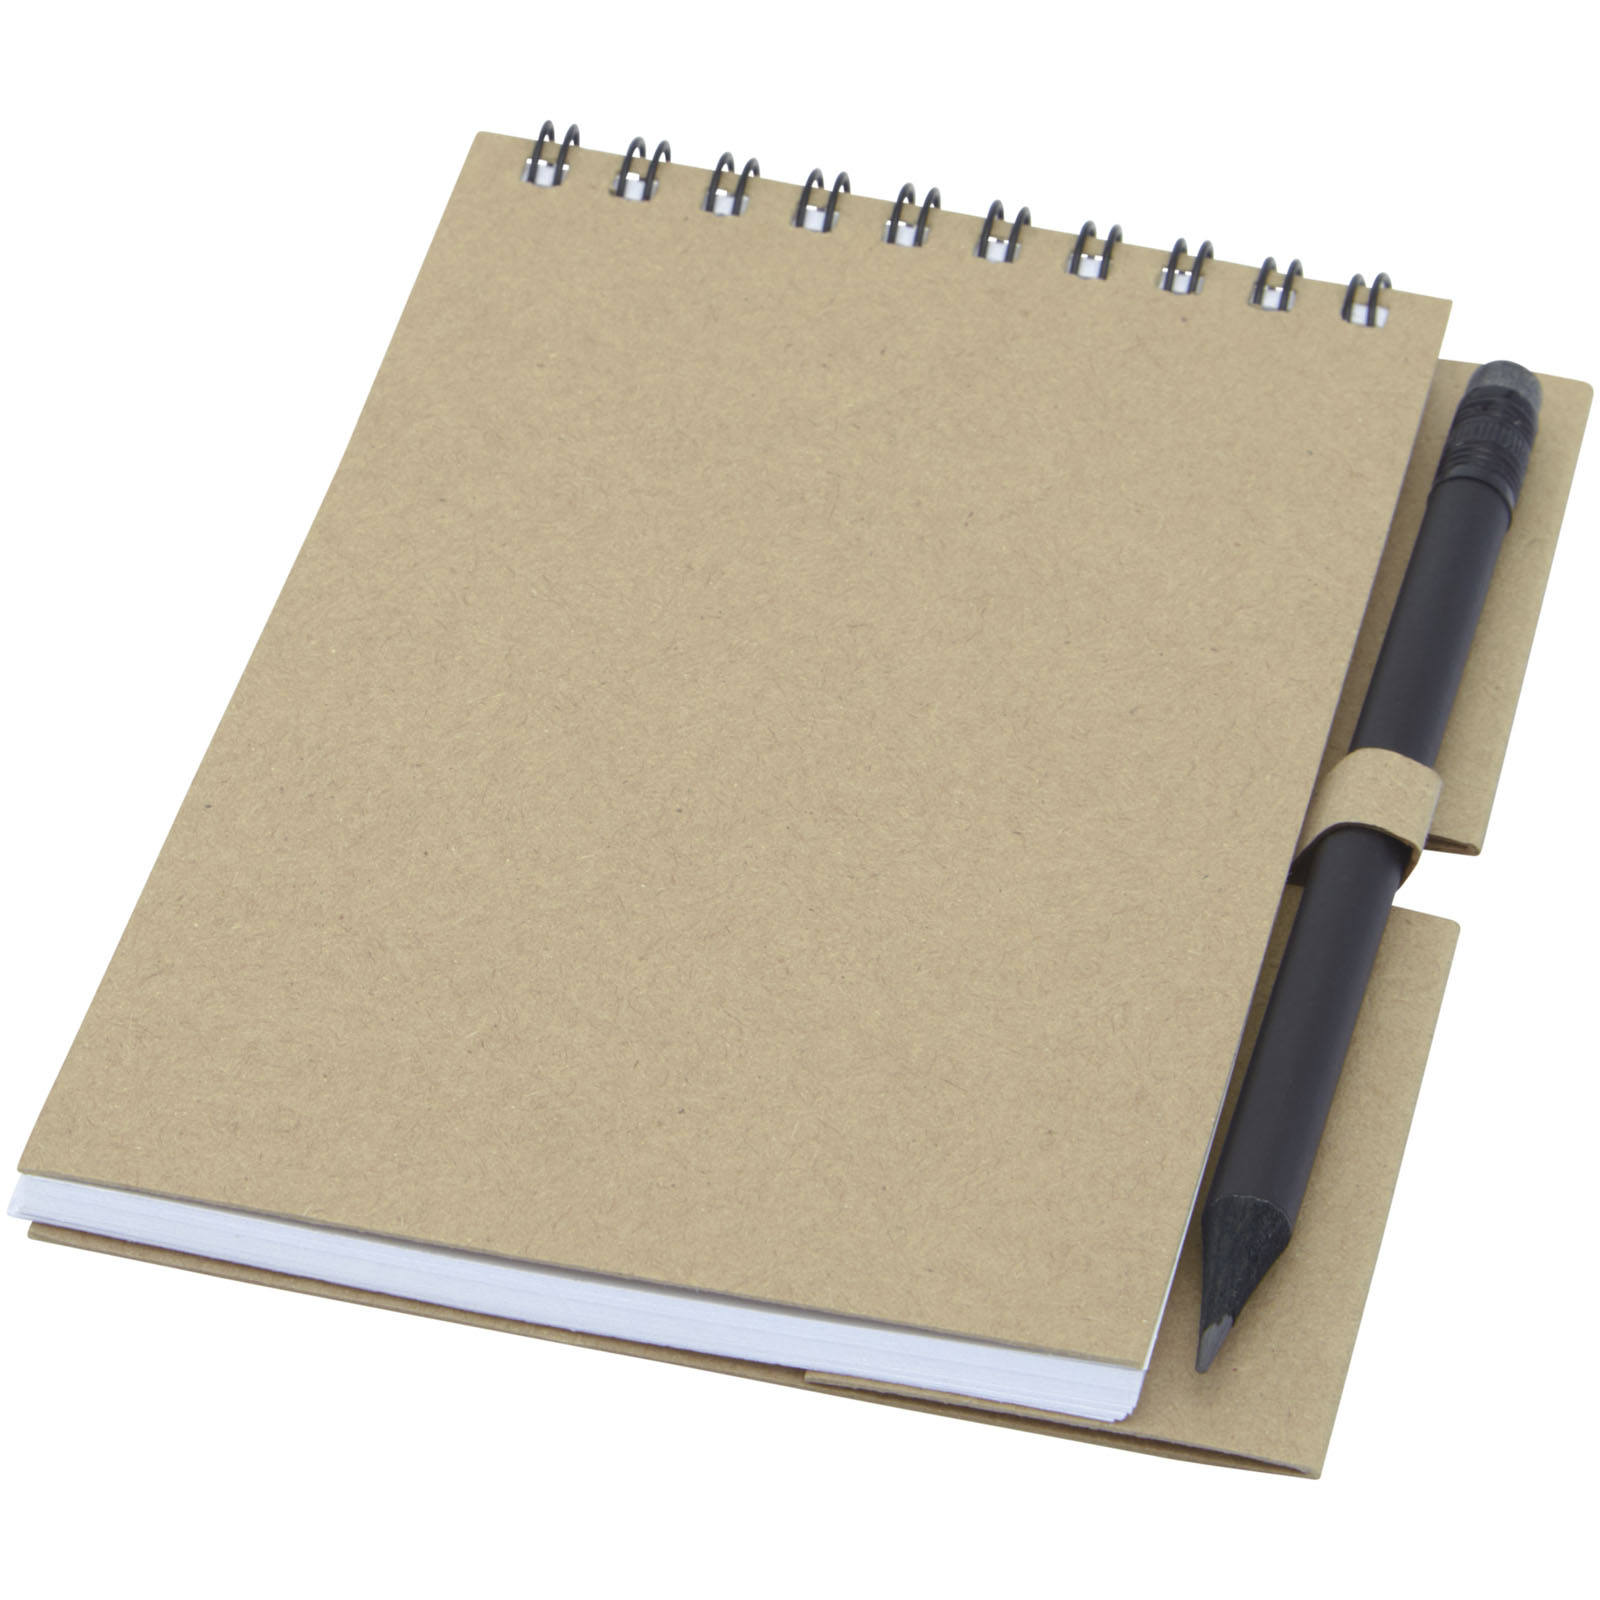 Advertising Notebooks - Luciano Eco wire notebook with pencil - small